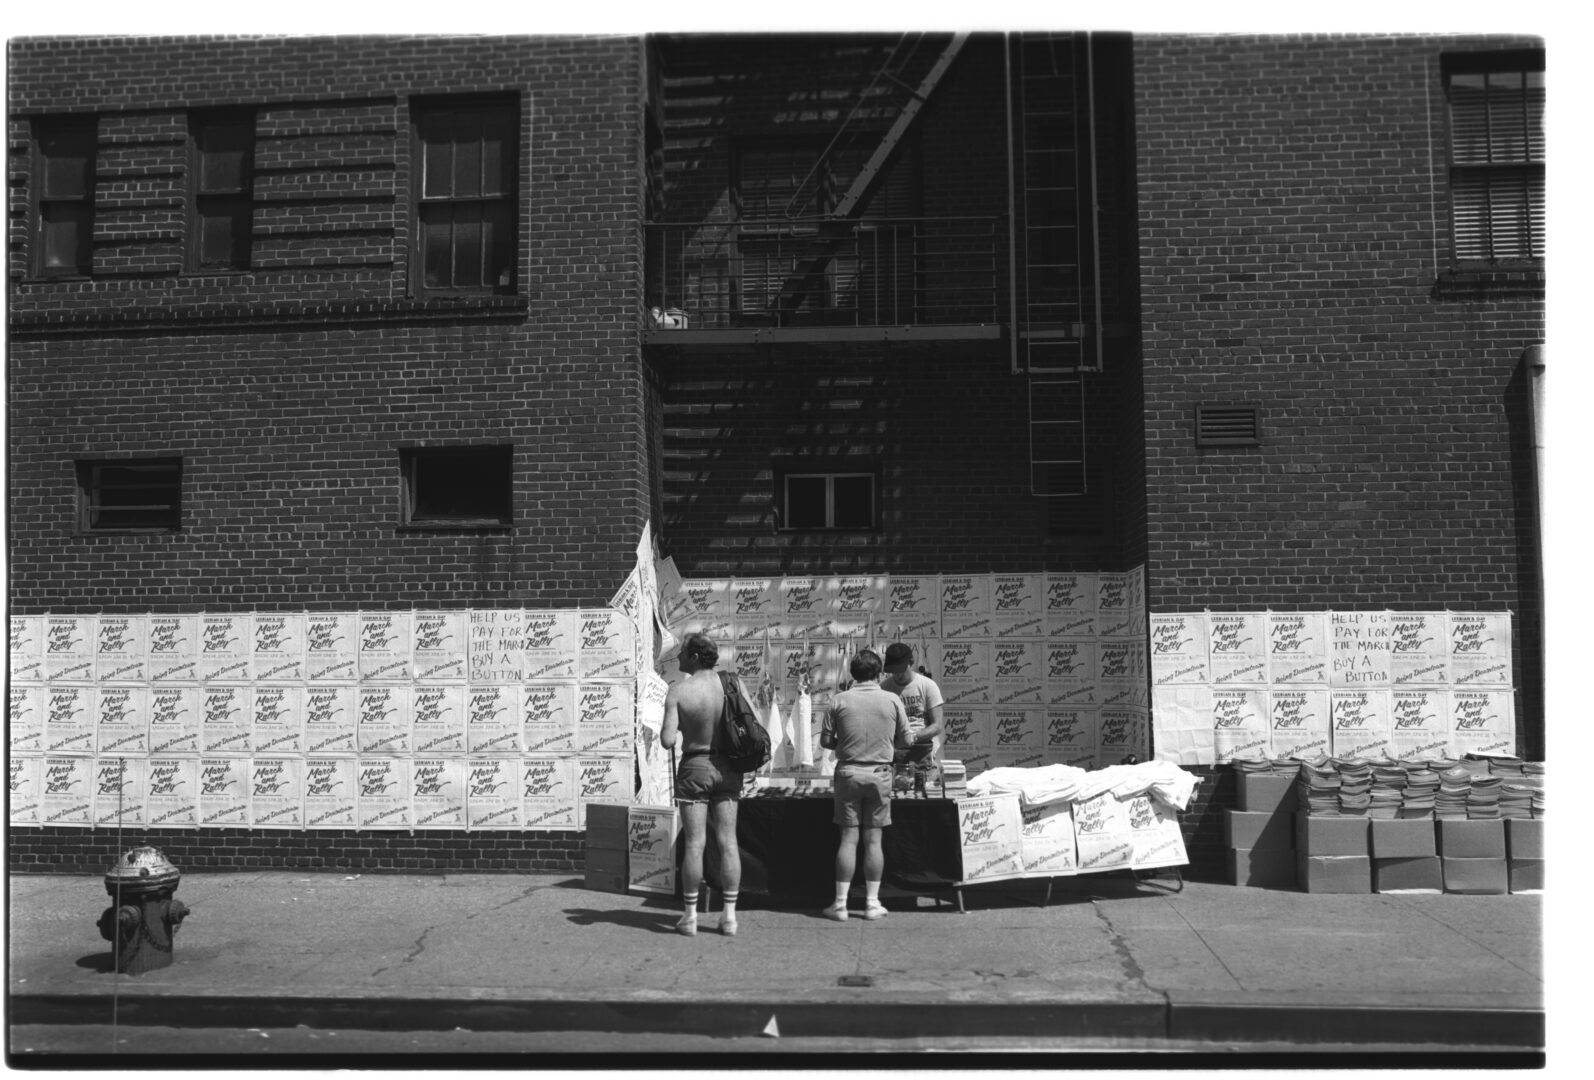 Hank O’ Neal, March and Rally from the series Gay Day, 1983. Vinyl photo mural, 116 x 252 in. © Hank O’Neal. Courtesy of the artist.